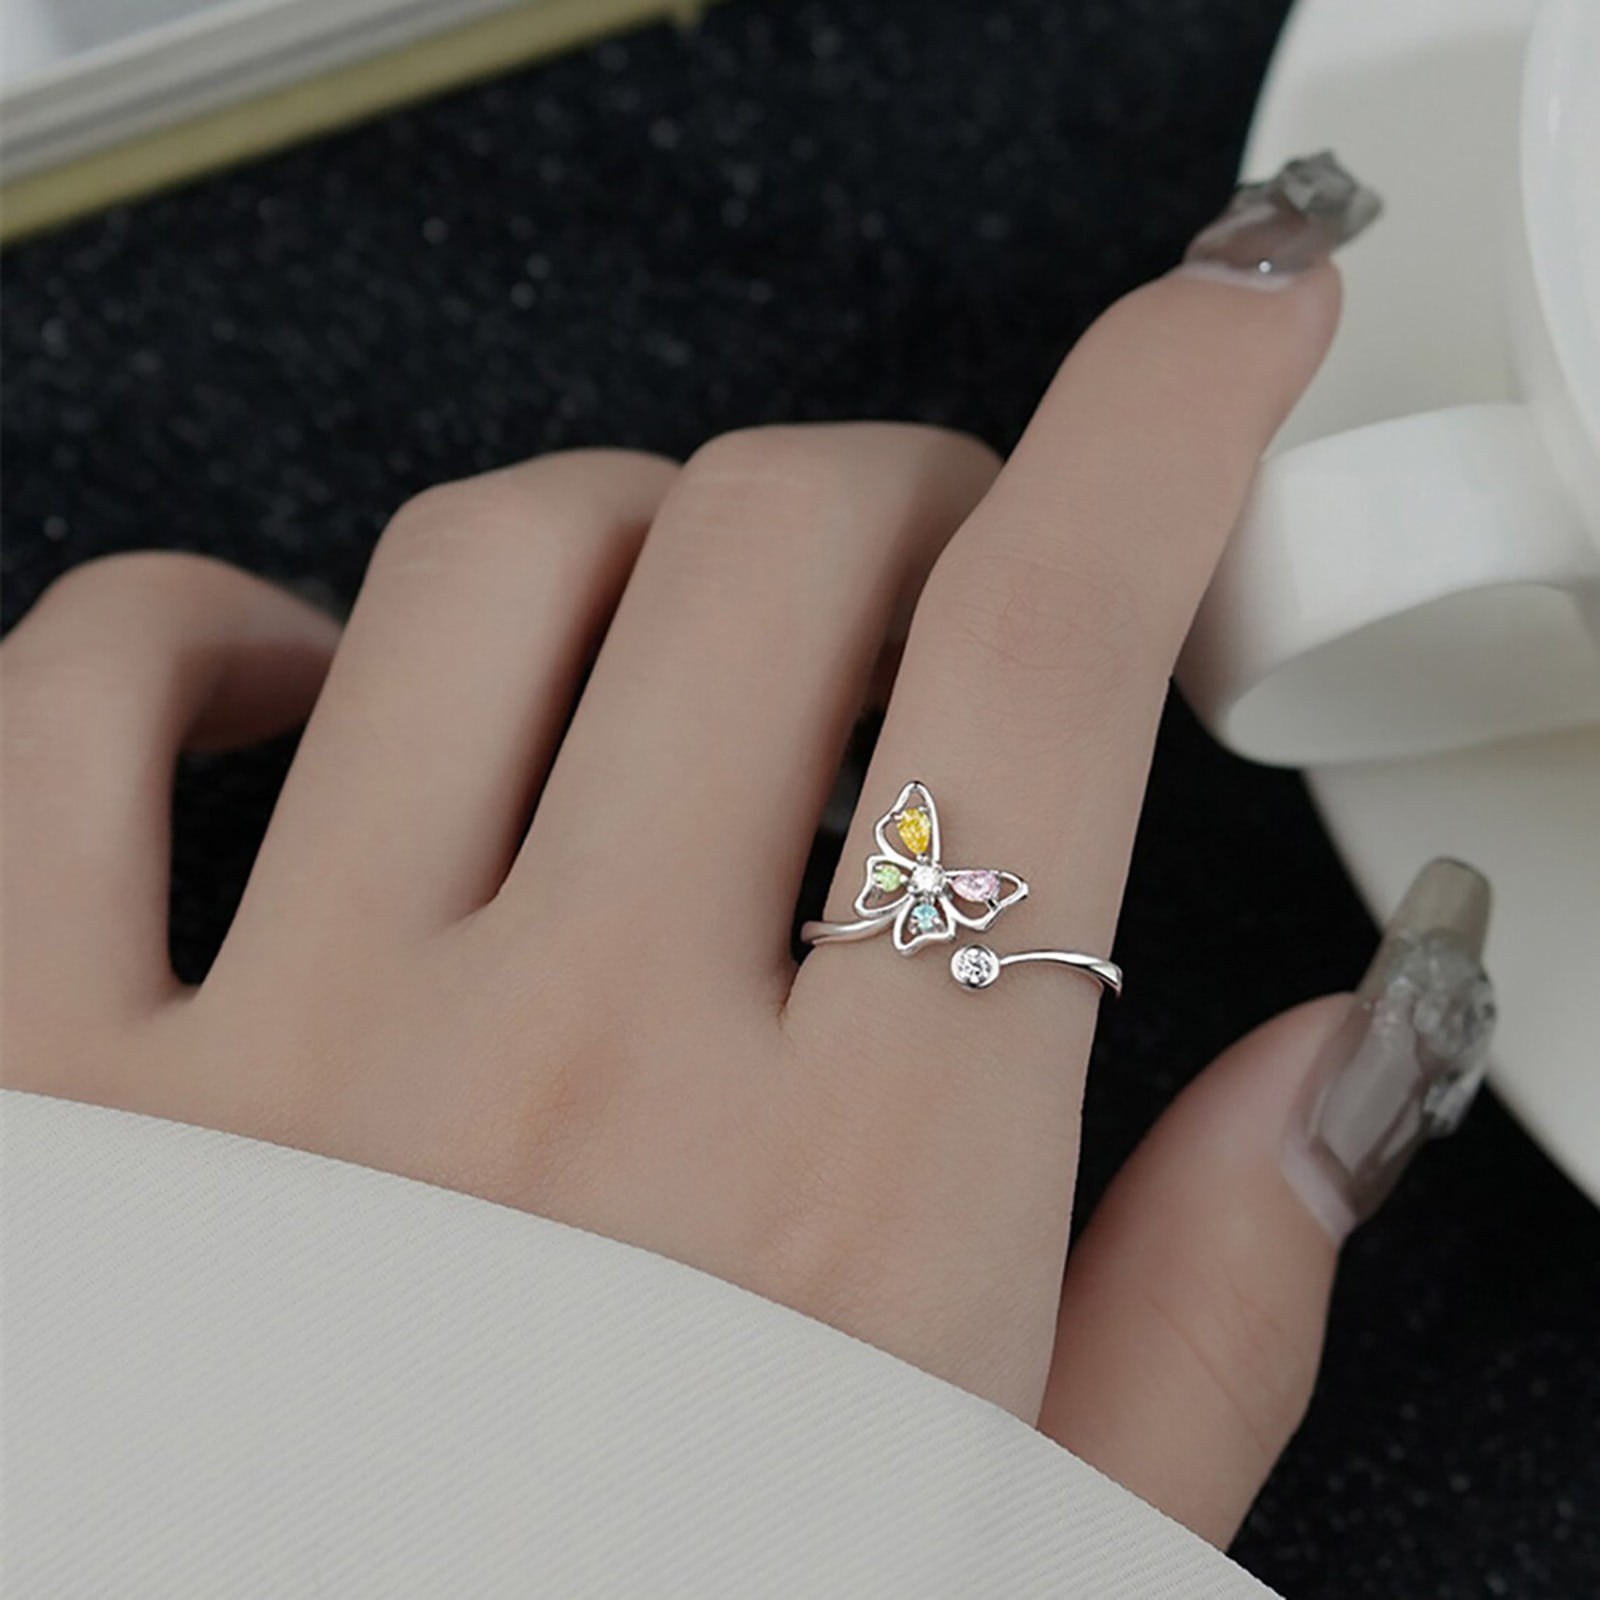 1 Pair Hug Rings , I Love You Forever Love You Mother Gift Sister Gifts  Engraved Words Hugging Hands Open Ring Friendship Jewelry Gift Without Box  | Fruugo NO